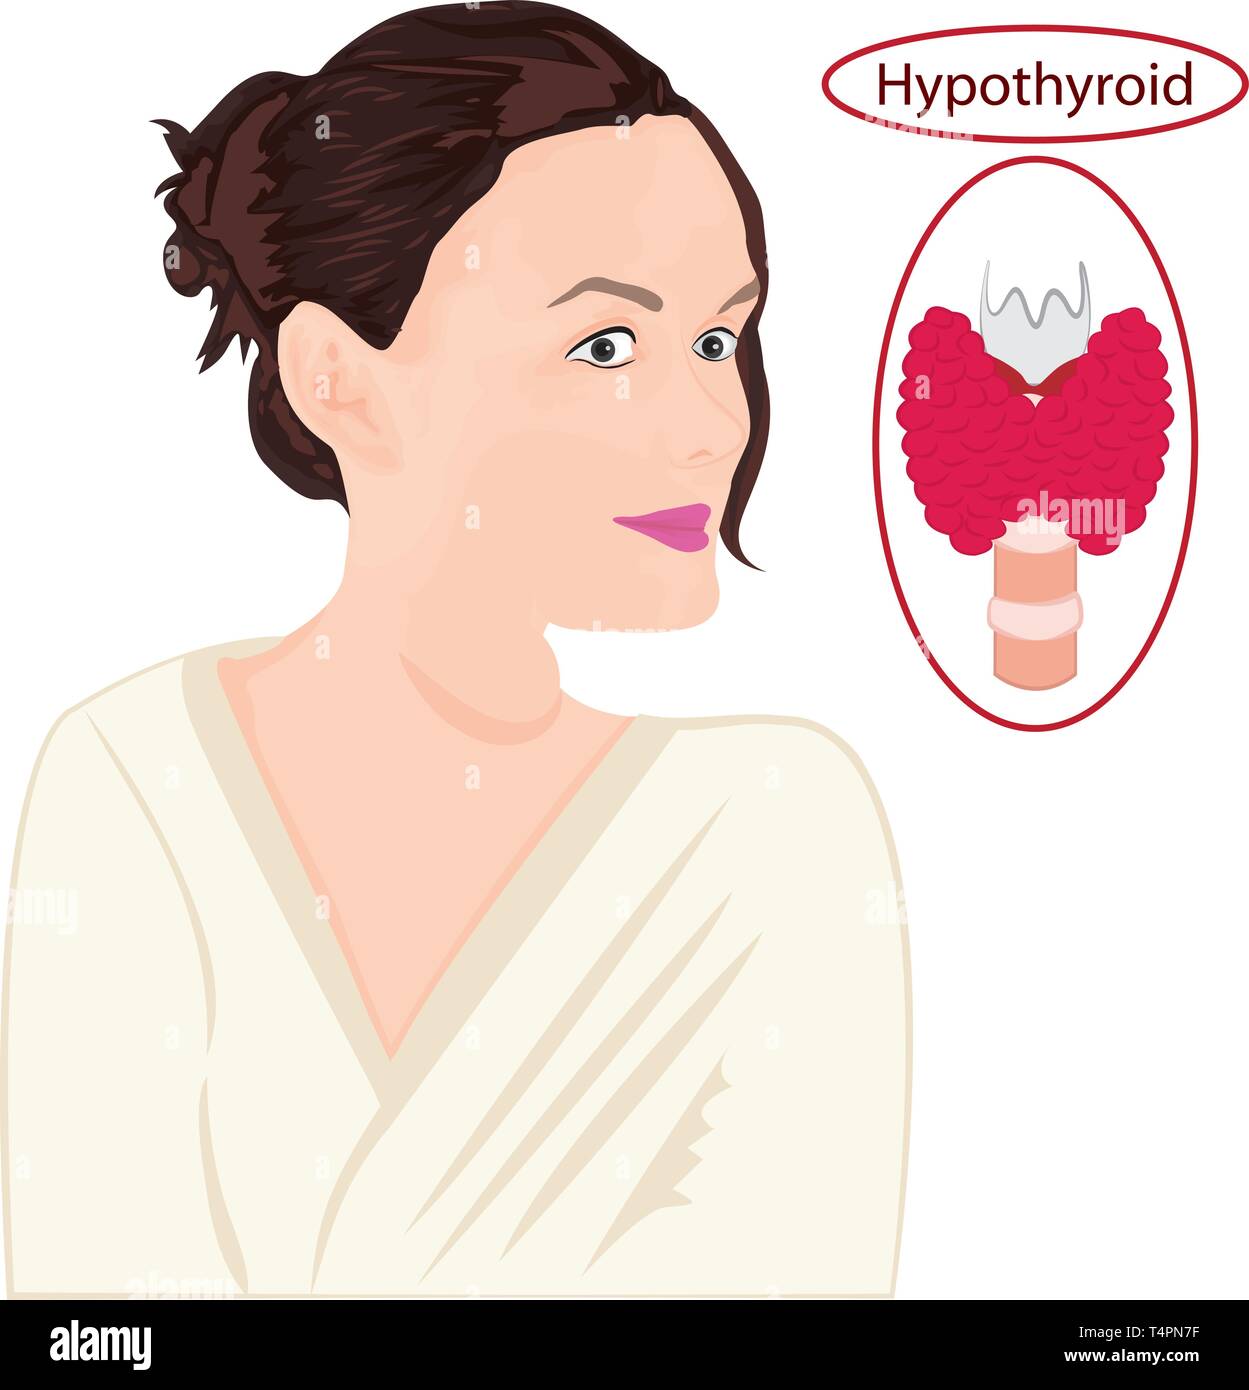 Goiter. Enlarged Thyroid. Endocrine disfunction vector illustration on a white background Stock Vector